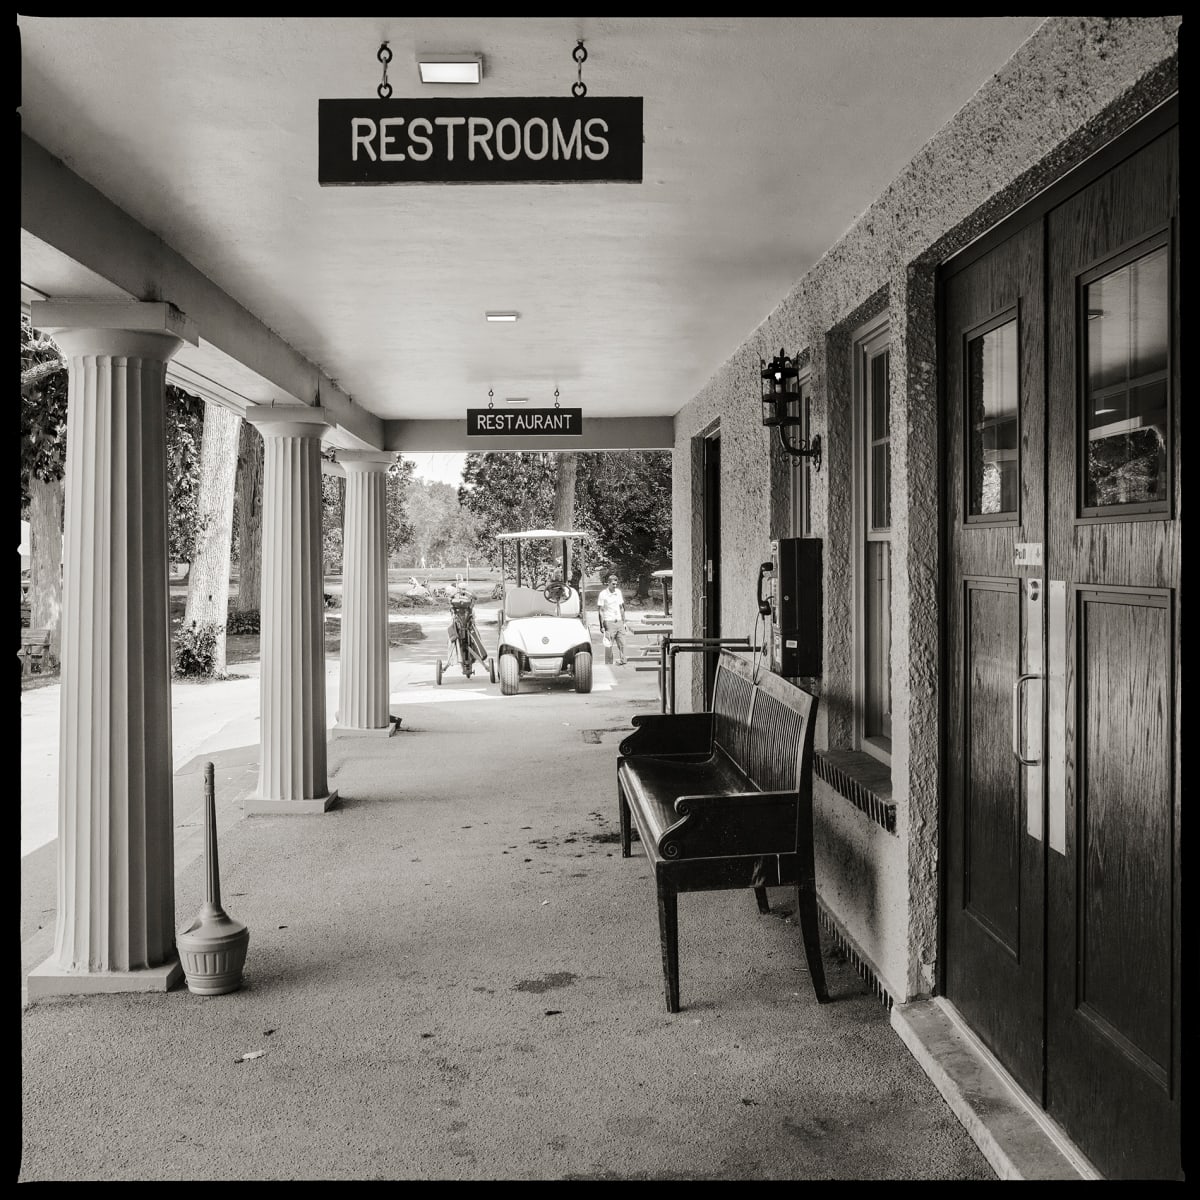 585.427.9724 – Genesee Valley Golf Course, 1000 East River Road, Rochester, NY 14623 by Eric T. Kunsman  Image: ID: A black and white image shows a pillared entrance way.  There is a black metal bench on the right.  Behind the bench is a wall mounted payphone.  There is a golf cart visible at the end of the entrance way.  There are signs for "Restrooms" and "Restaurant" hanging from the ceiling.